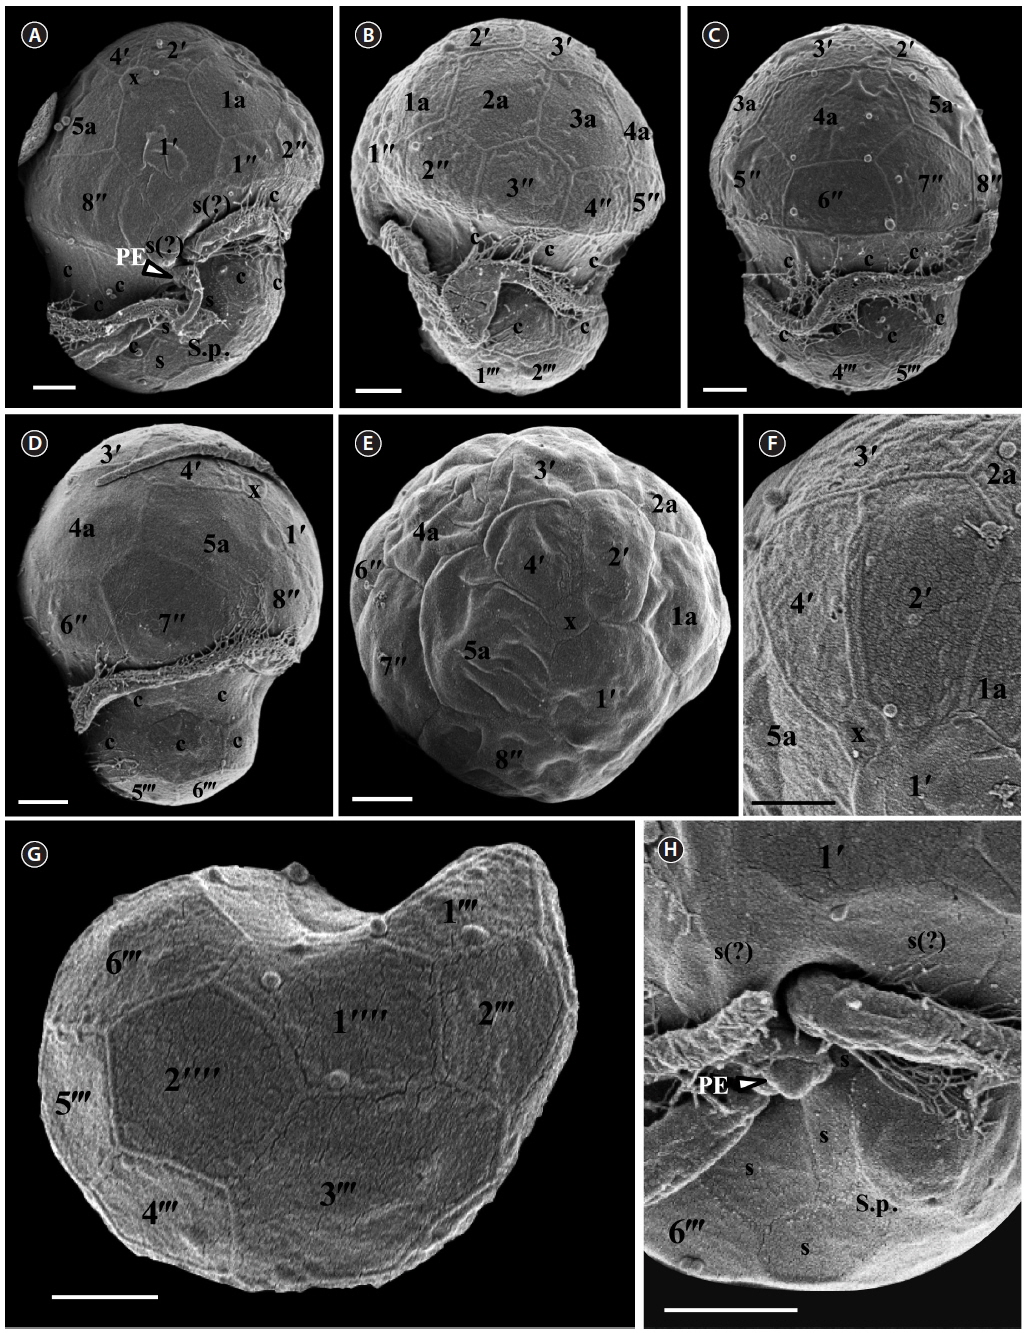 Scanning electron micrographs of Symbiodinium minutum motile cells. (A) Ventral view showing the episome, cingulum (c), sulcus (s), peduncle (PE), and hyposome. (B) Ventral-left lateral view showing the episome, cingulum (c), and hyposome. (C) Dorsal view showing the episome, cingulum (c), and hyposome. (D) Ventral-right lateral view showing the episome, cingulum (c), and hyposome. (E) Apical view showing the episome and elongated amphiesmal vesicle (EAV). (F) Apical view showing the EAV with small knobs. (G) Antapical view showing the hyposome. (H) Antapical-ventral view showing the sulcus (s) and peduncle (PE). S.p., posterior sulcus. Scale bars represent: A-H, 1 μm.